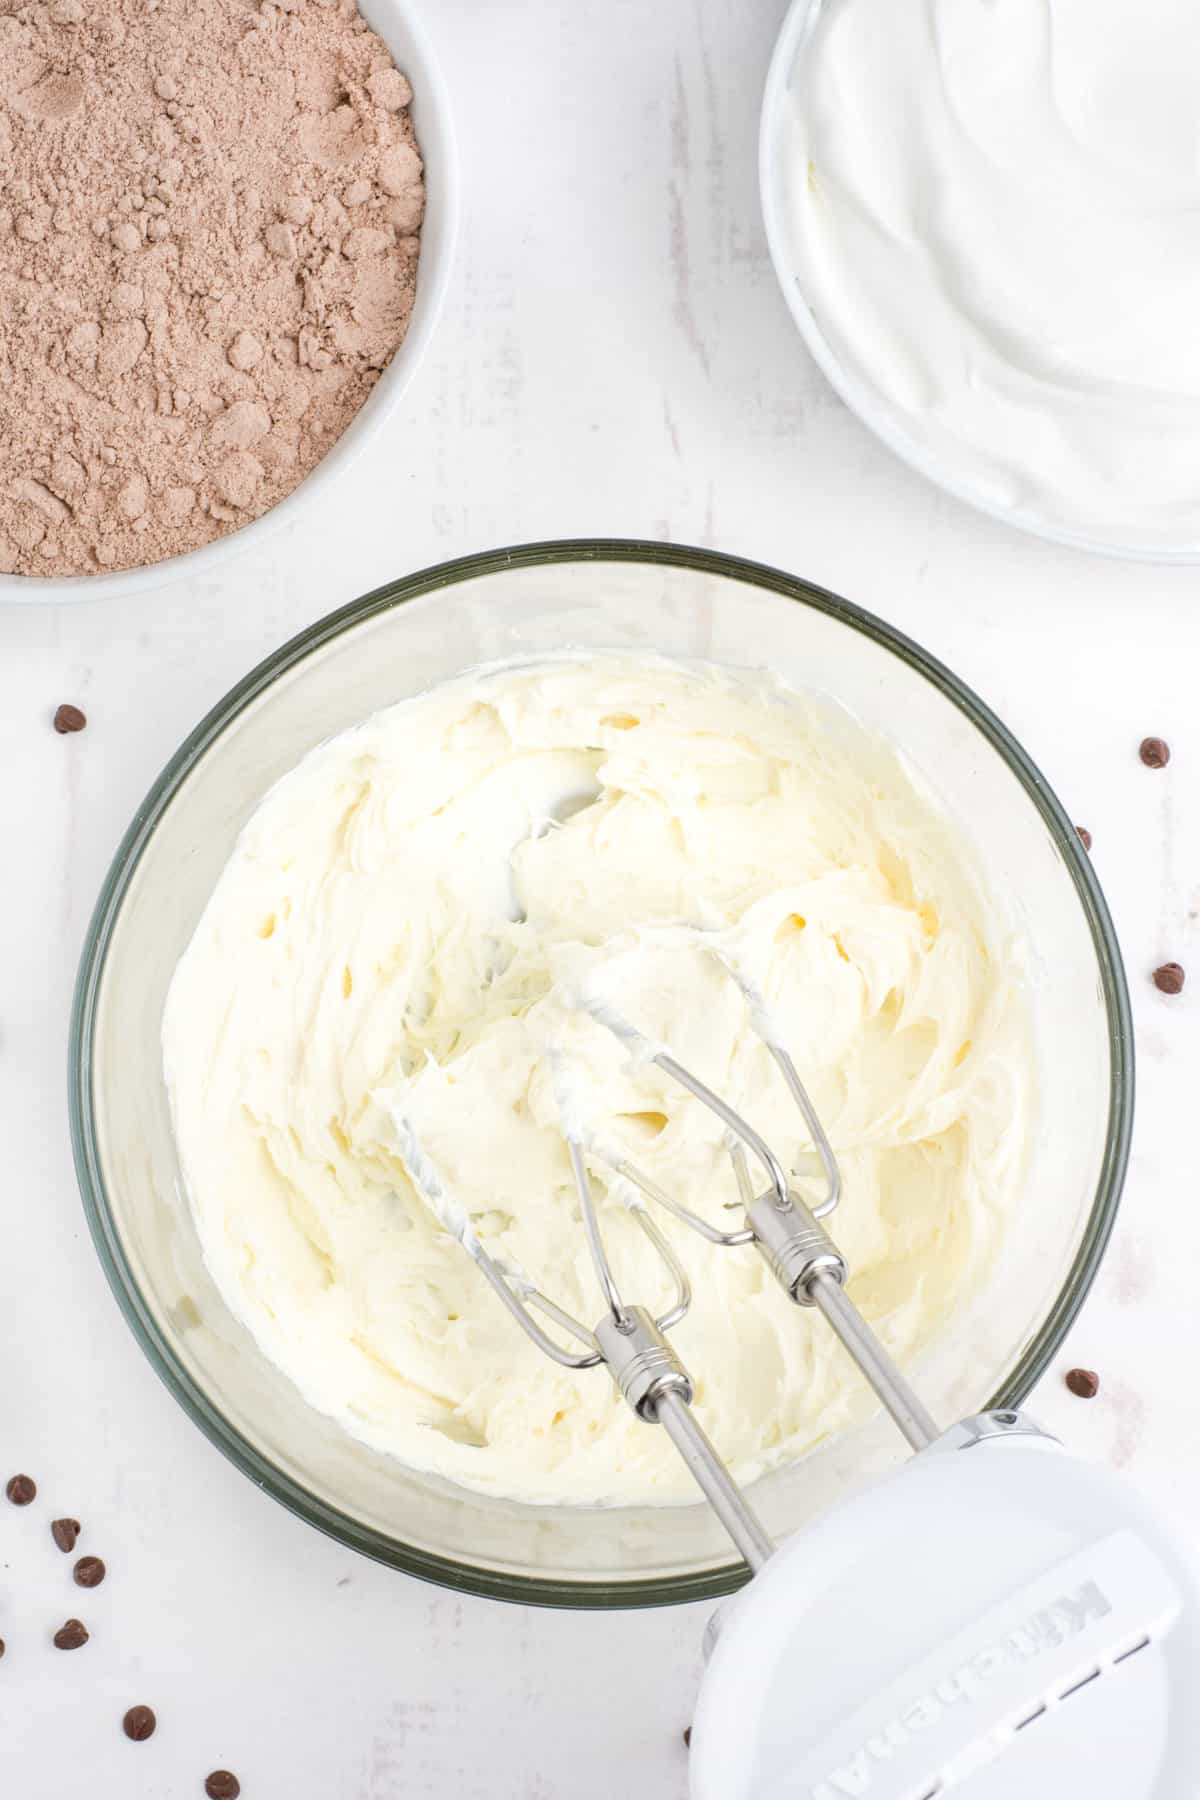 Cream cheese beaten until smooth and creamy with a hand mixer.